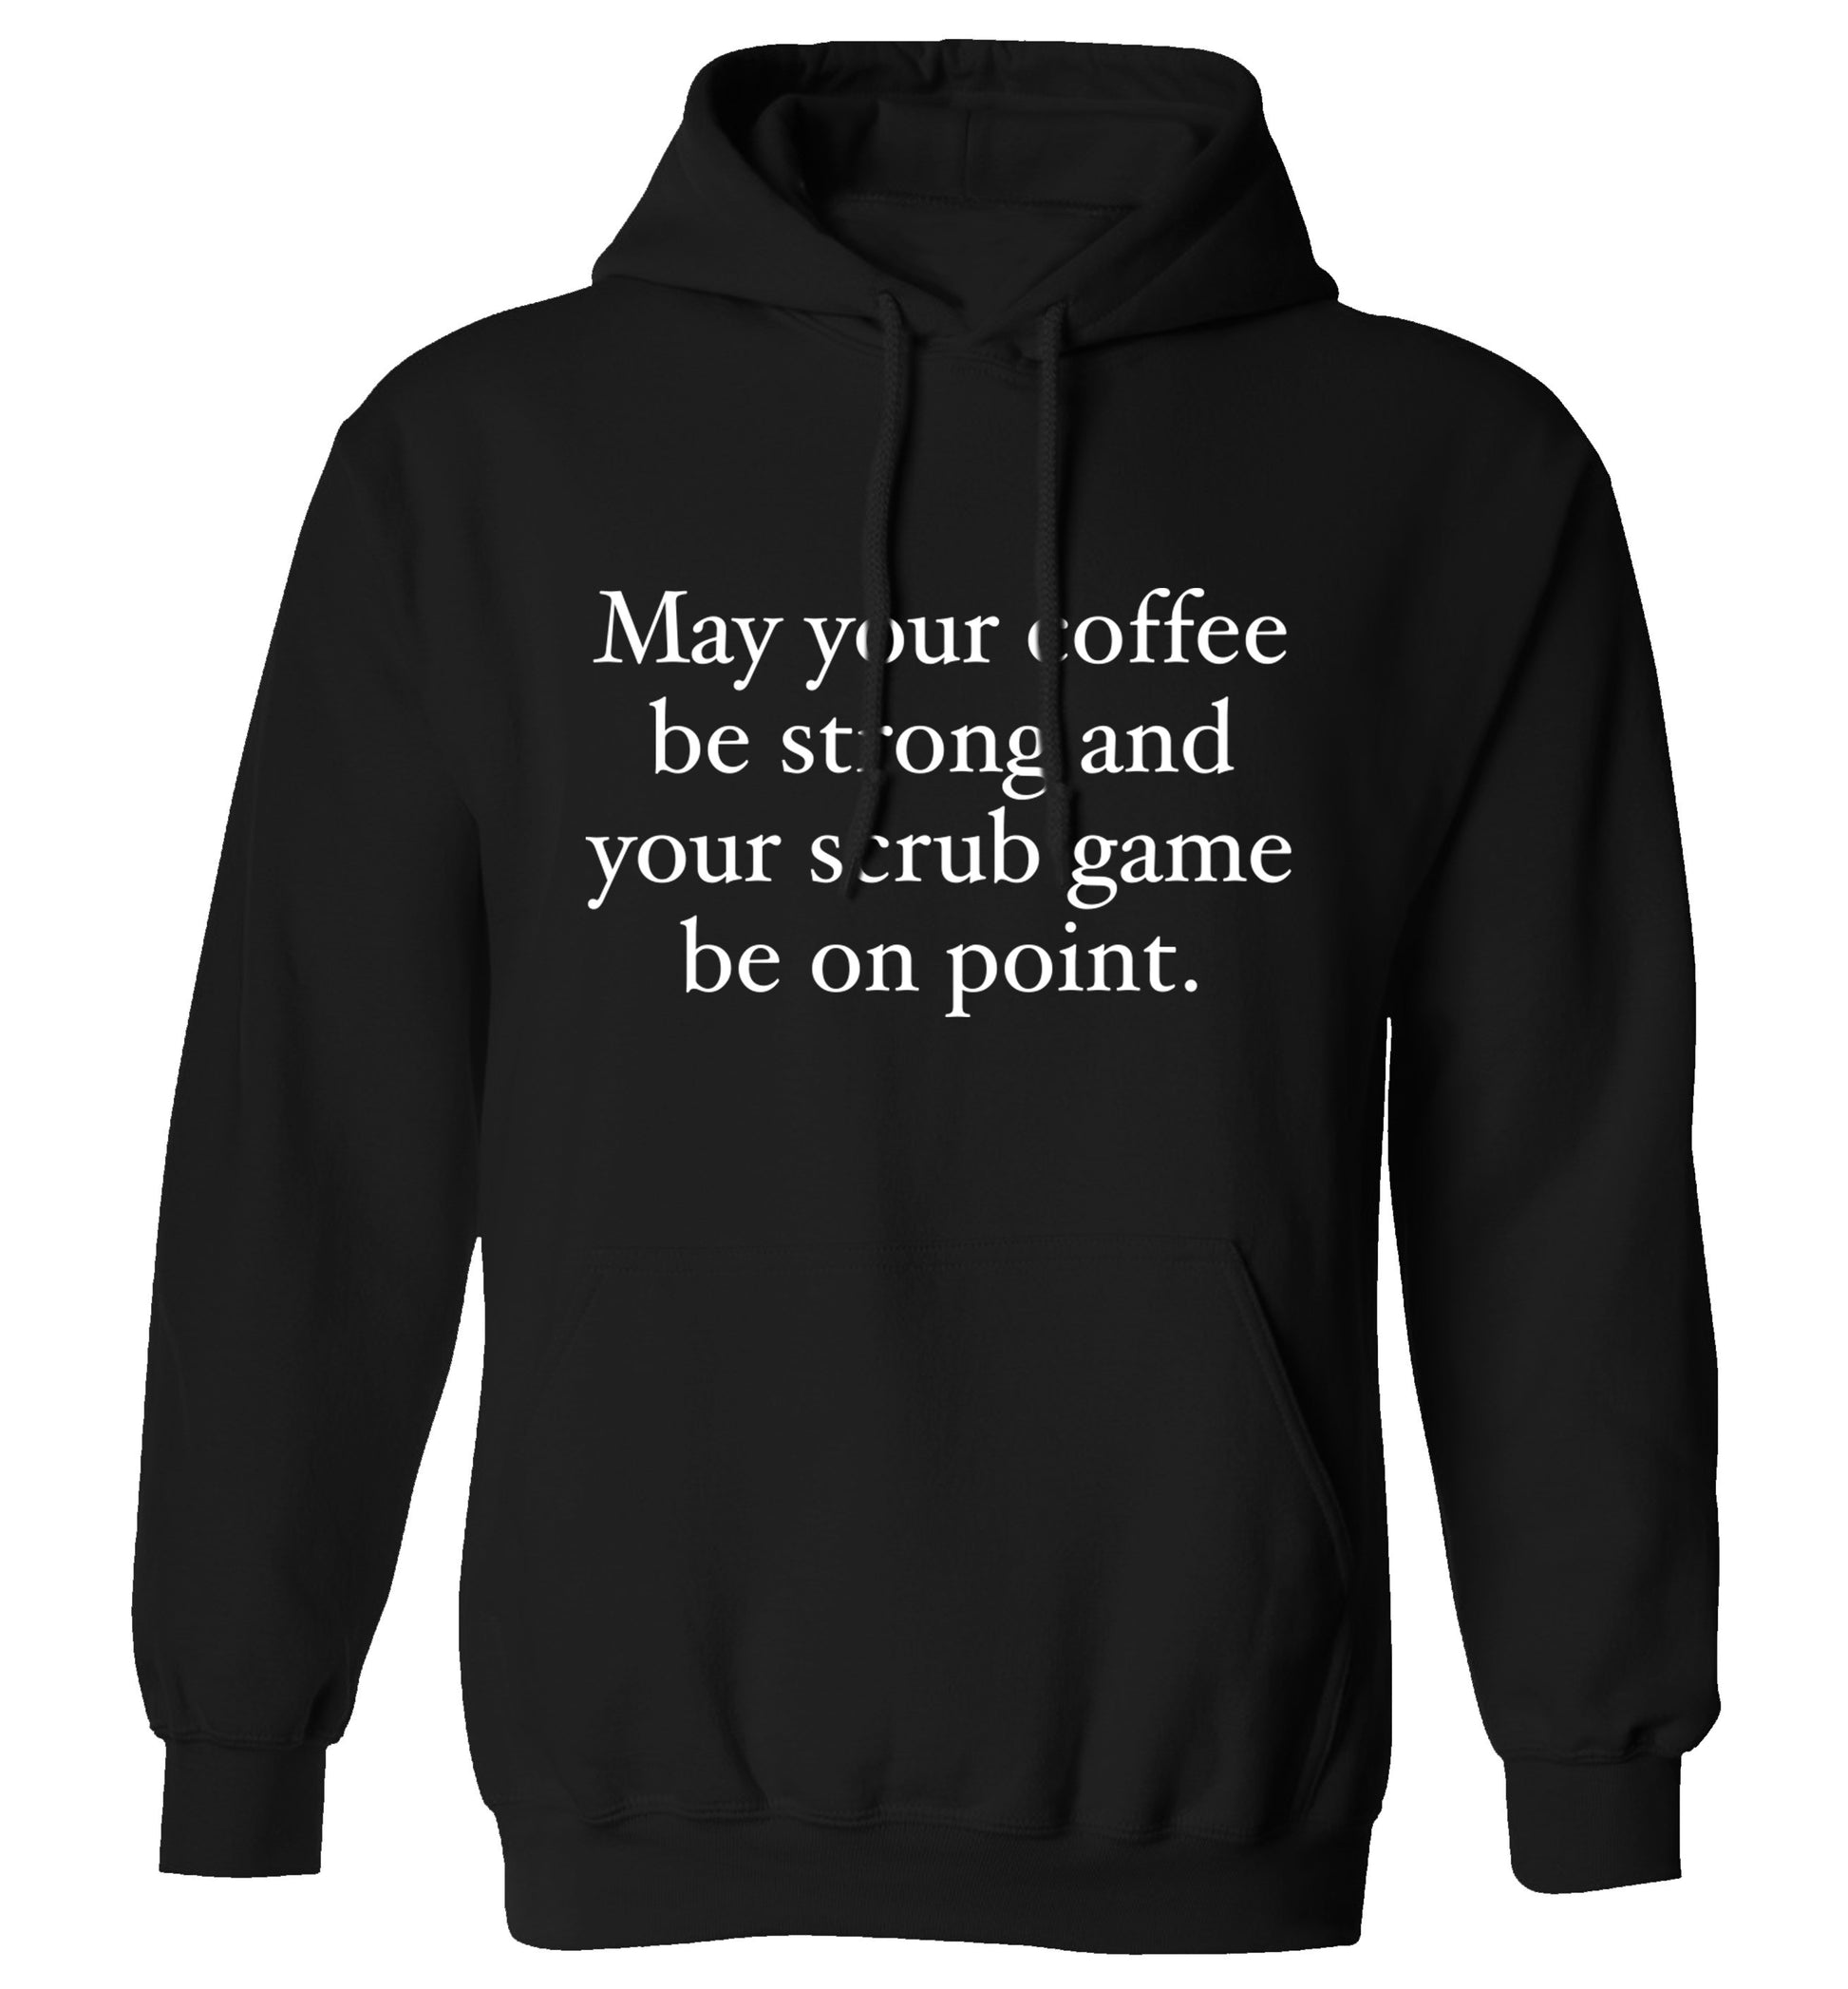 May your caffeine be strong and your scrub game be on point adults unisex black hoodie 2XL